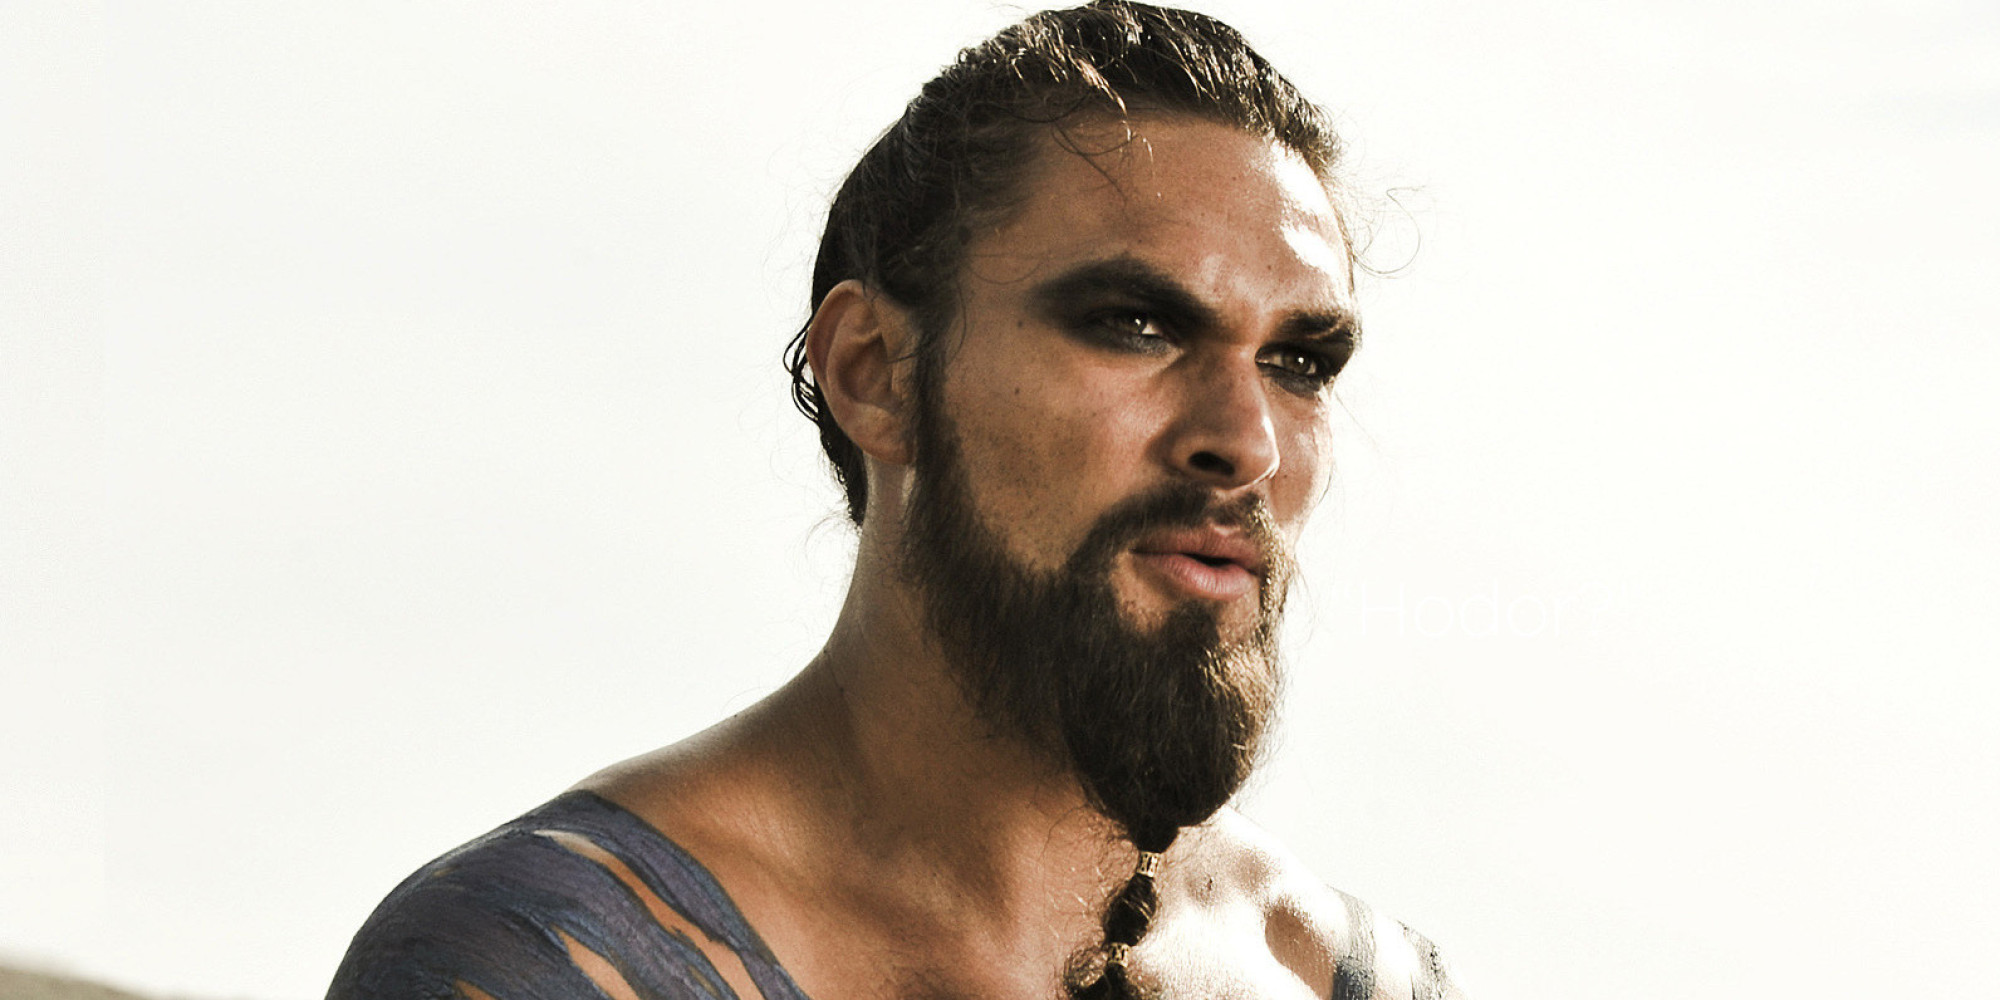 Jason Momoa's 'Game Of Thrones' Audition Tape Is Better Than You'd Imagine | HuffPost